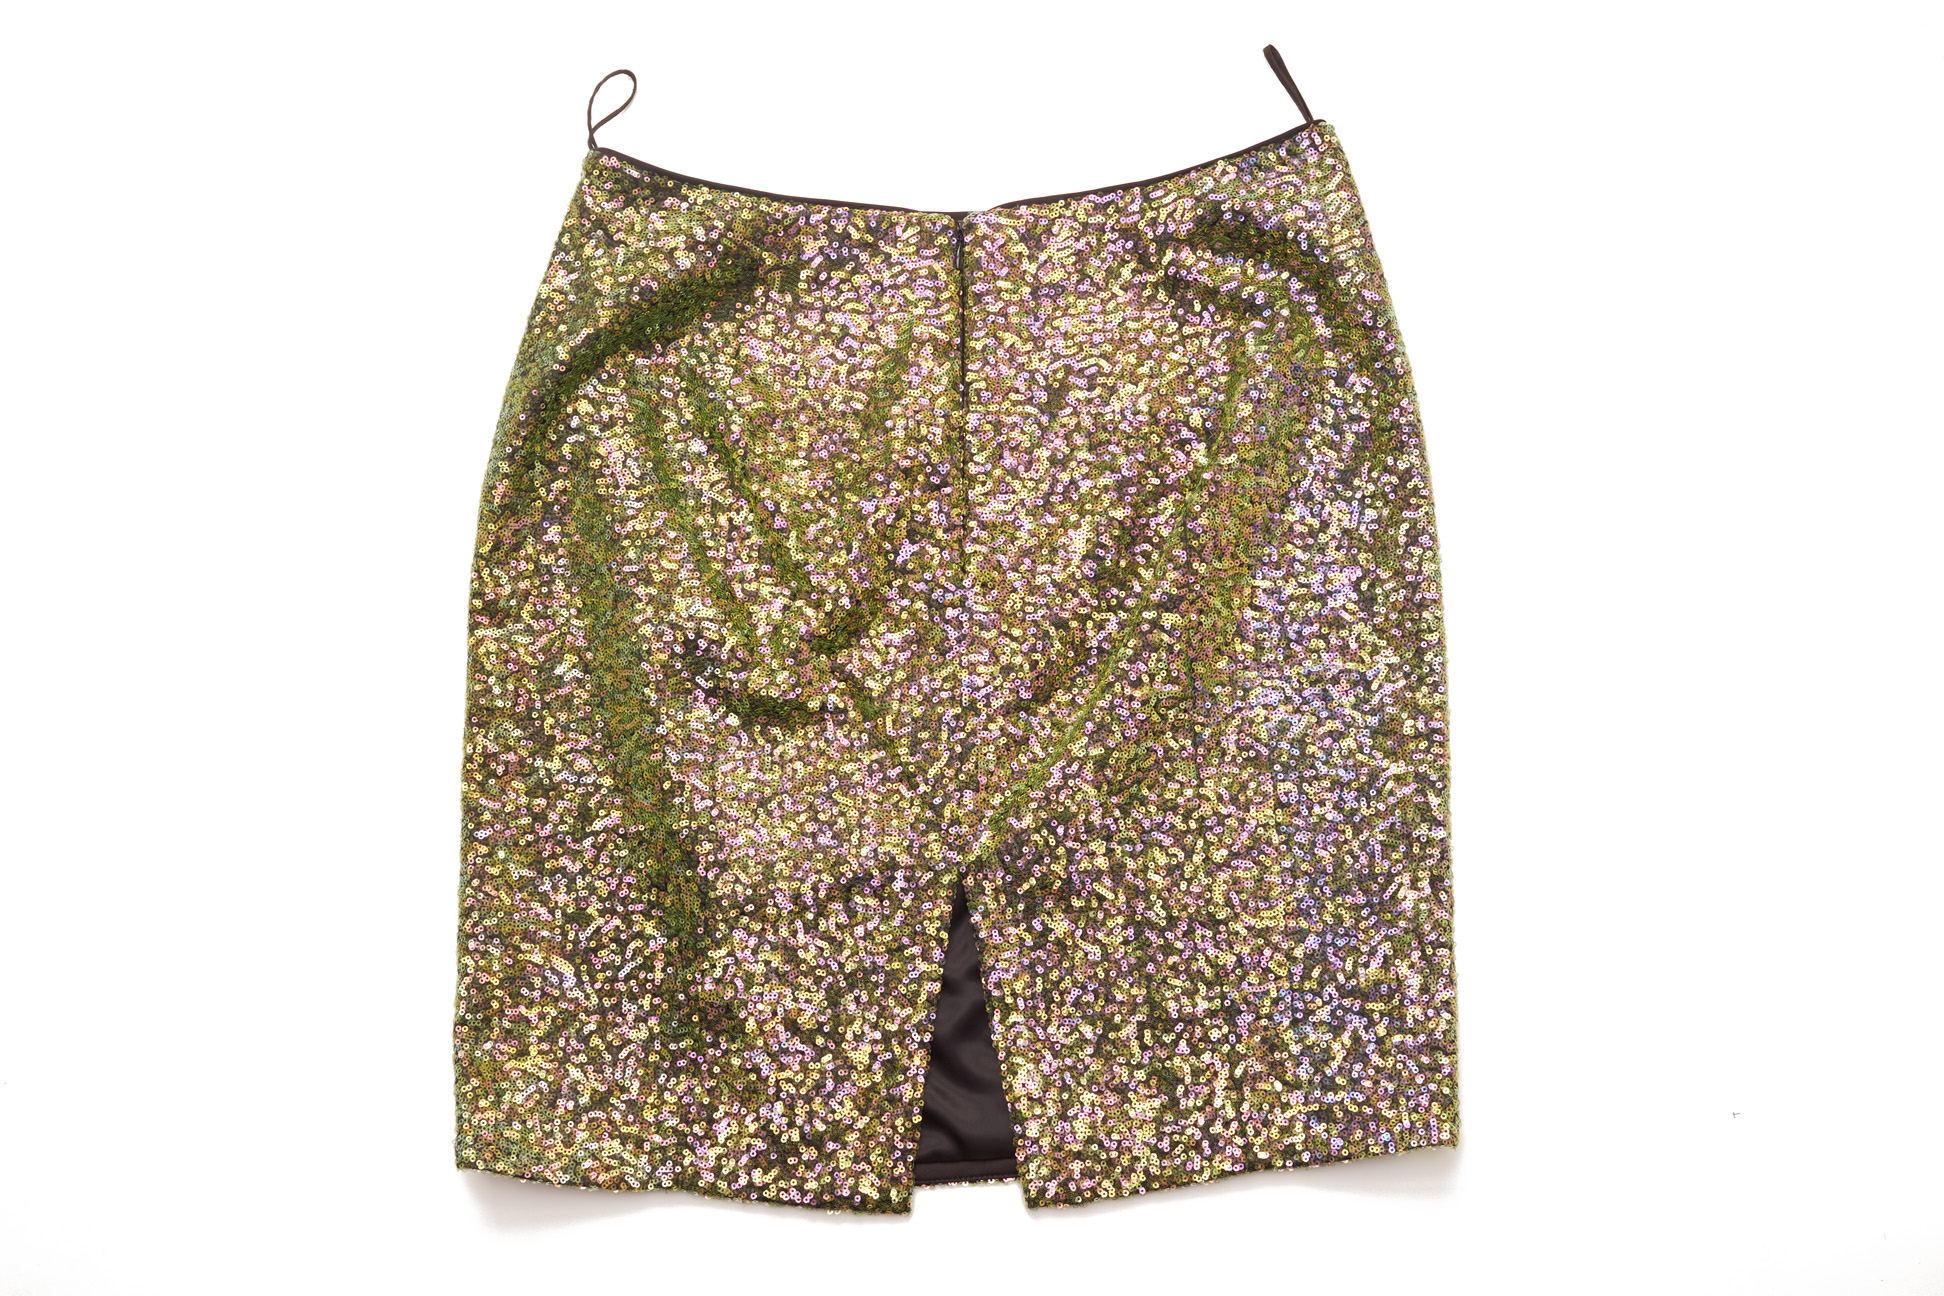 AN ADOLFO DOMINGUEZ GREEN SEQUIN SKIRT - Image 2 of 2